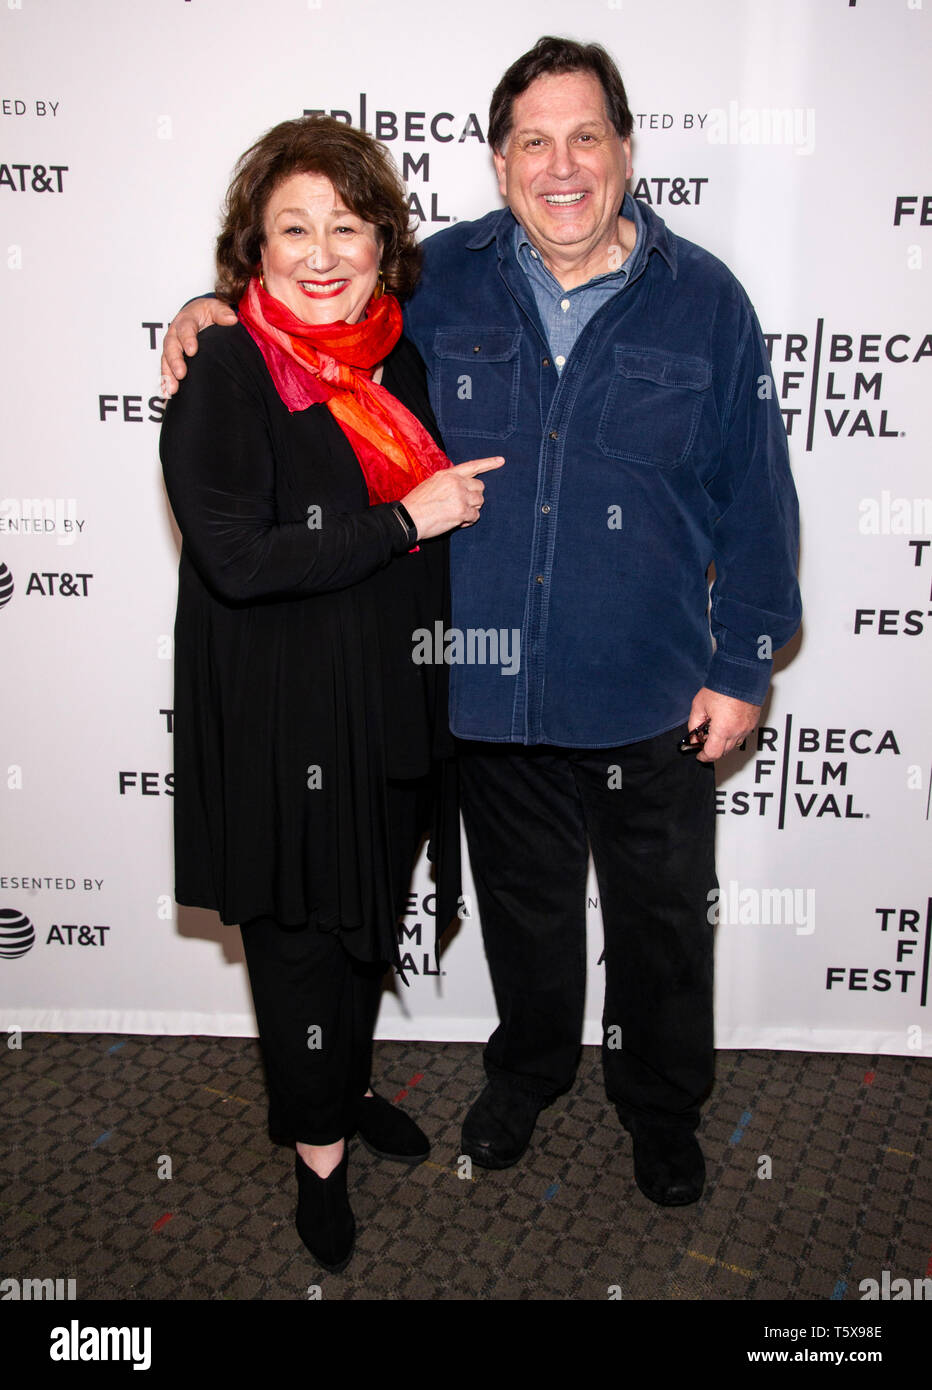 New York, NY - April 26, 2019: Margo Martindale and Skipp Sudduth attend the 'Blow The Man Down' screening during the 2019 Tribeca Film Festival at SV Stock Photo